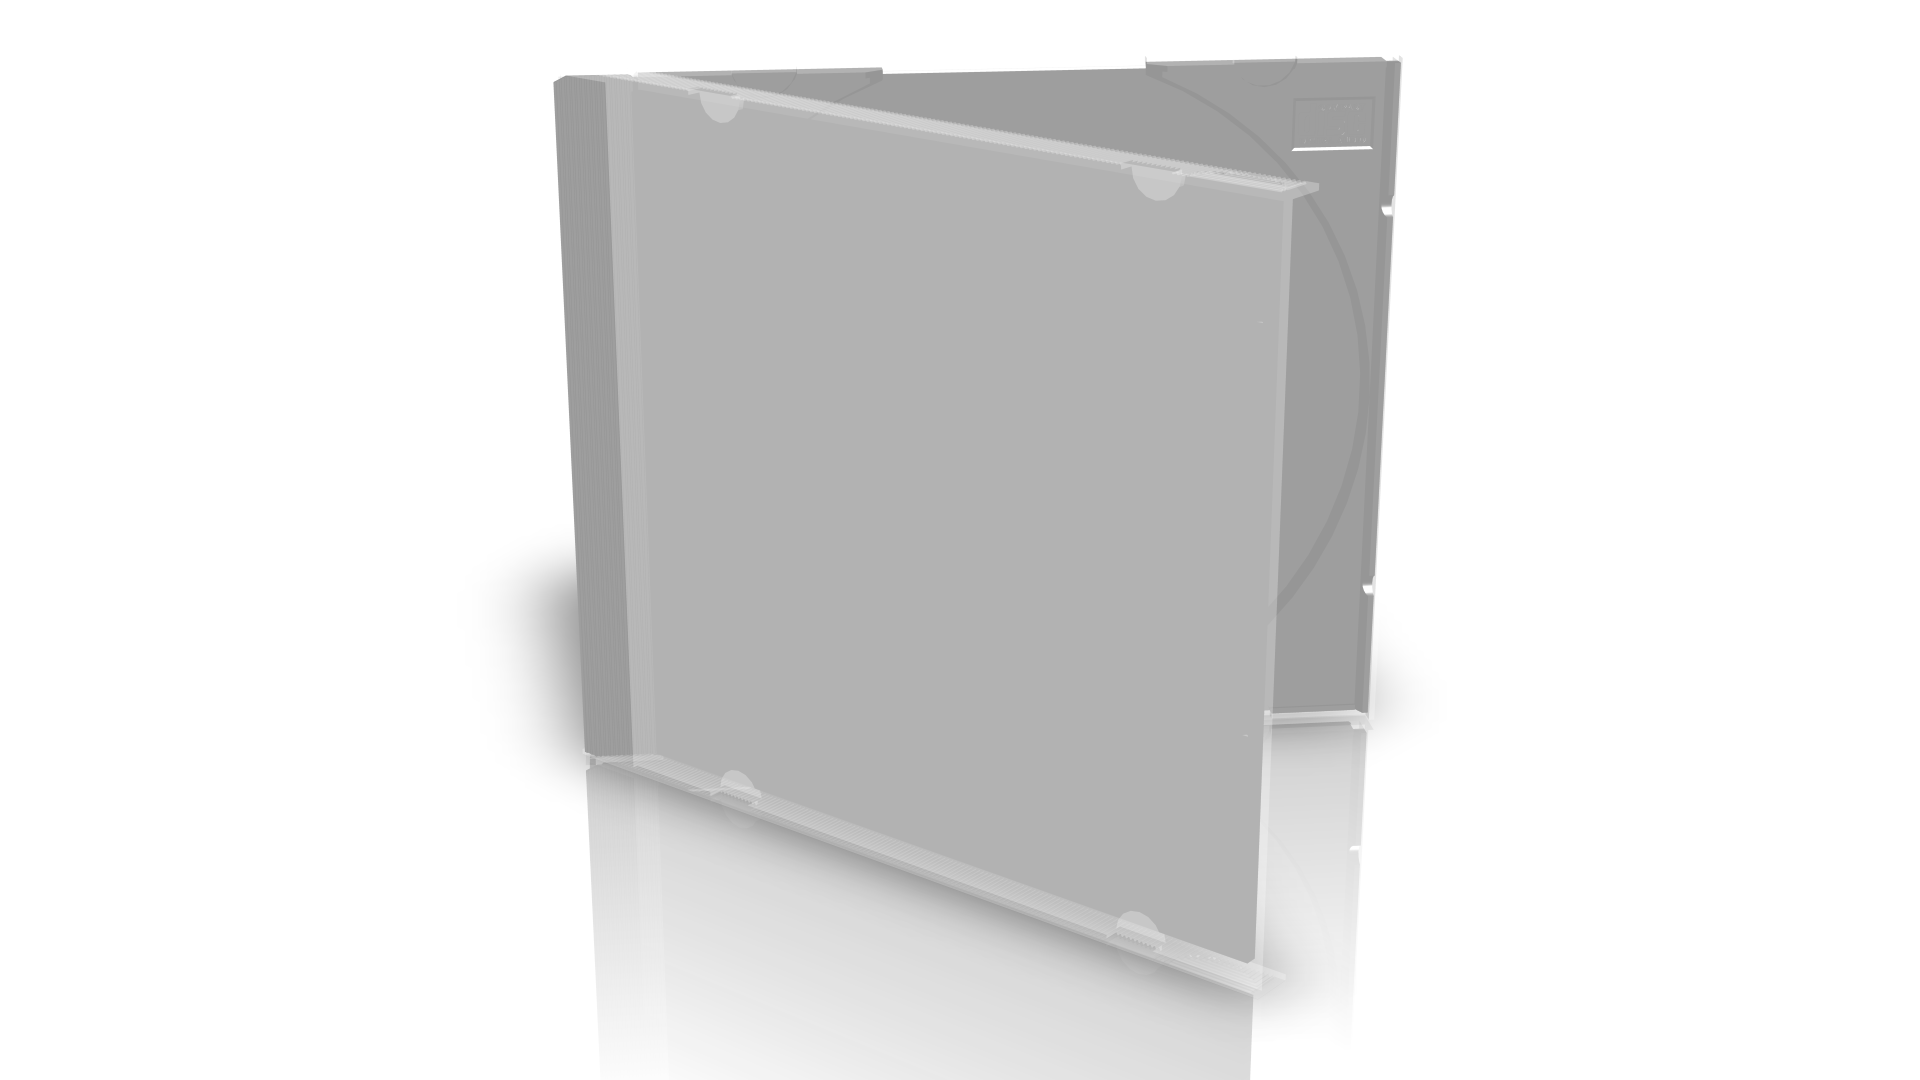 3D Model of a CD Jewel Case Standing Open without any material. Grey in appearance. 